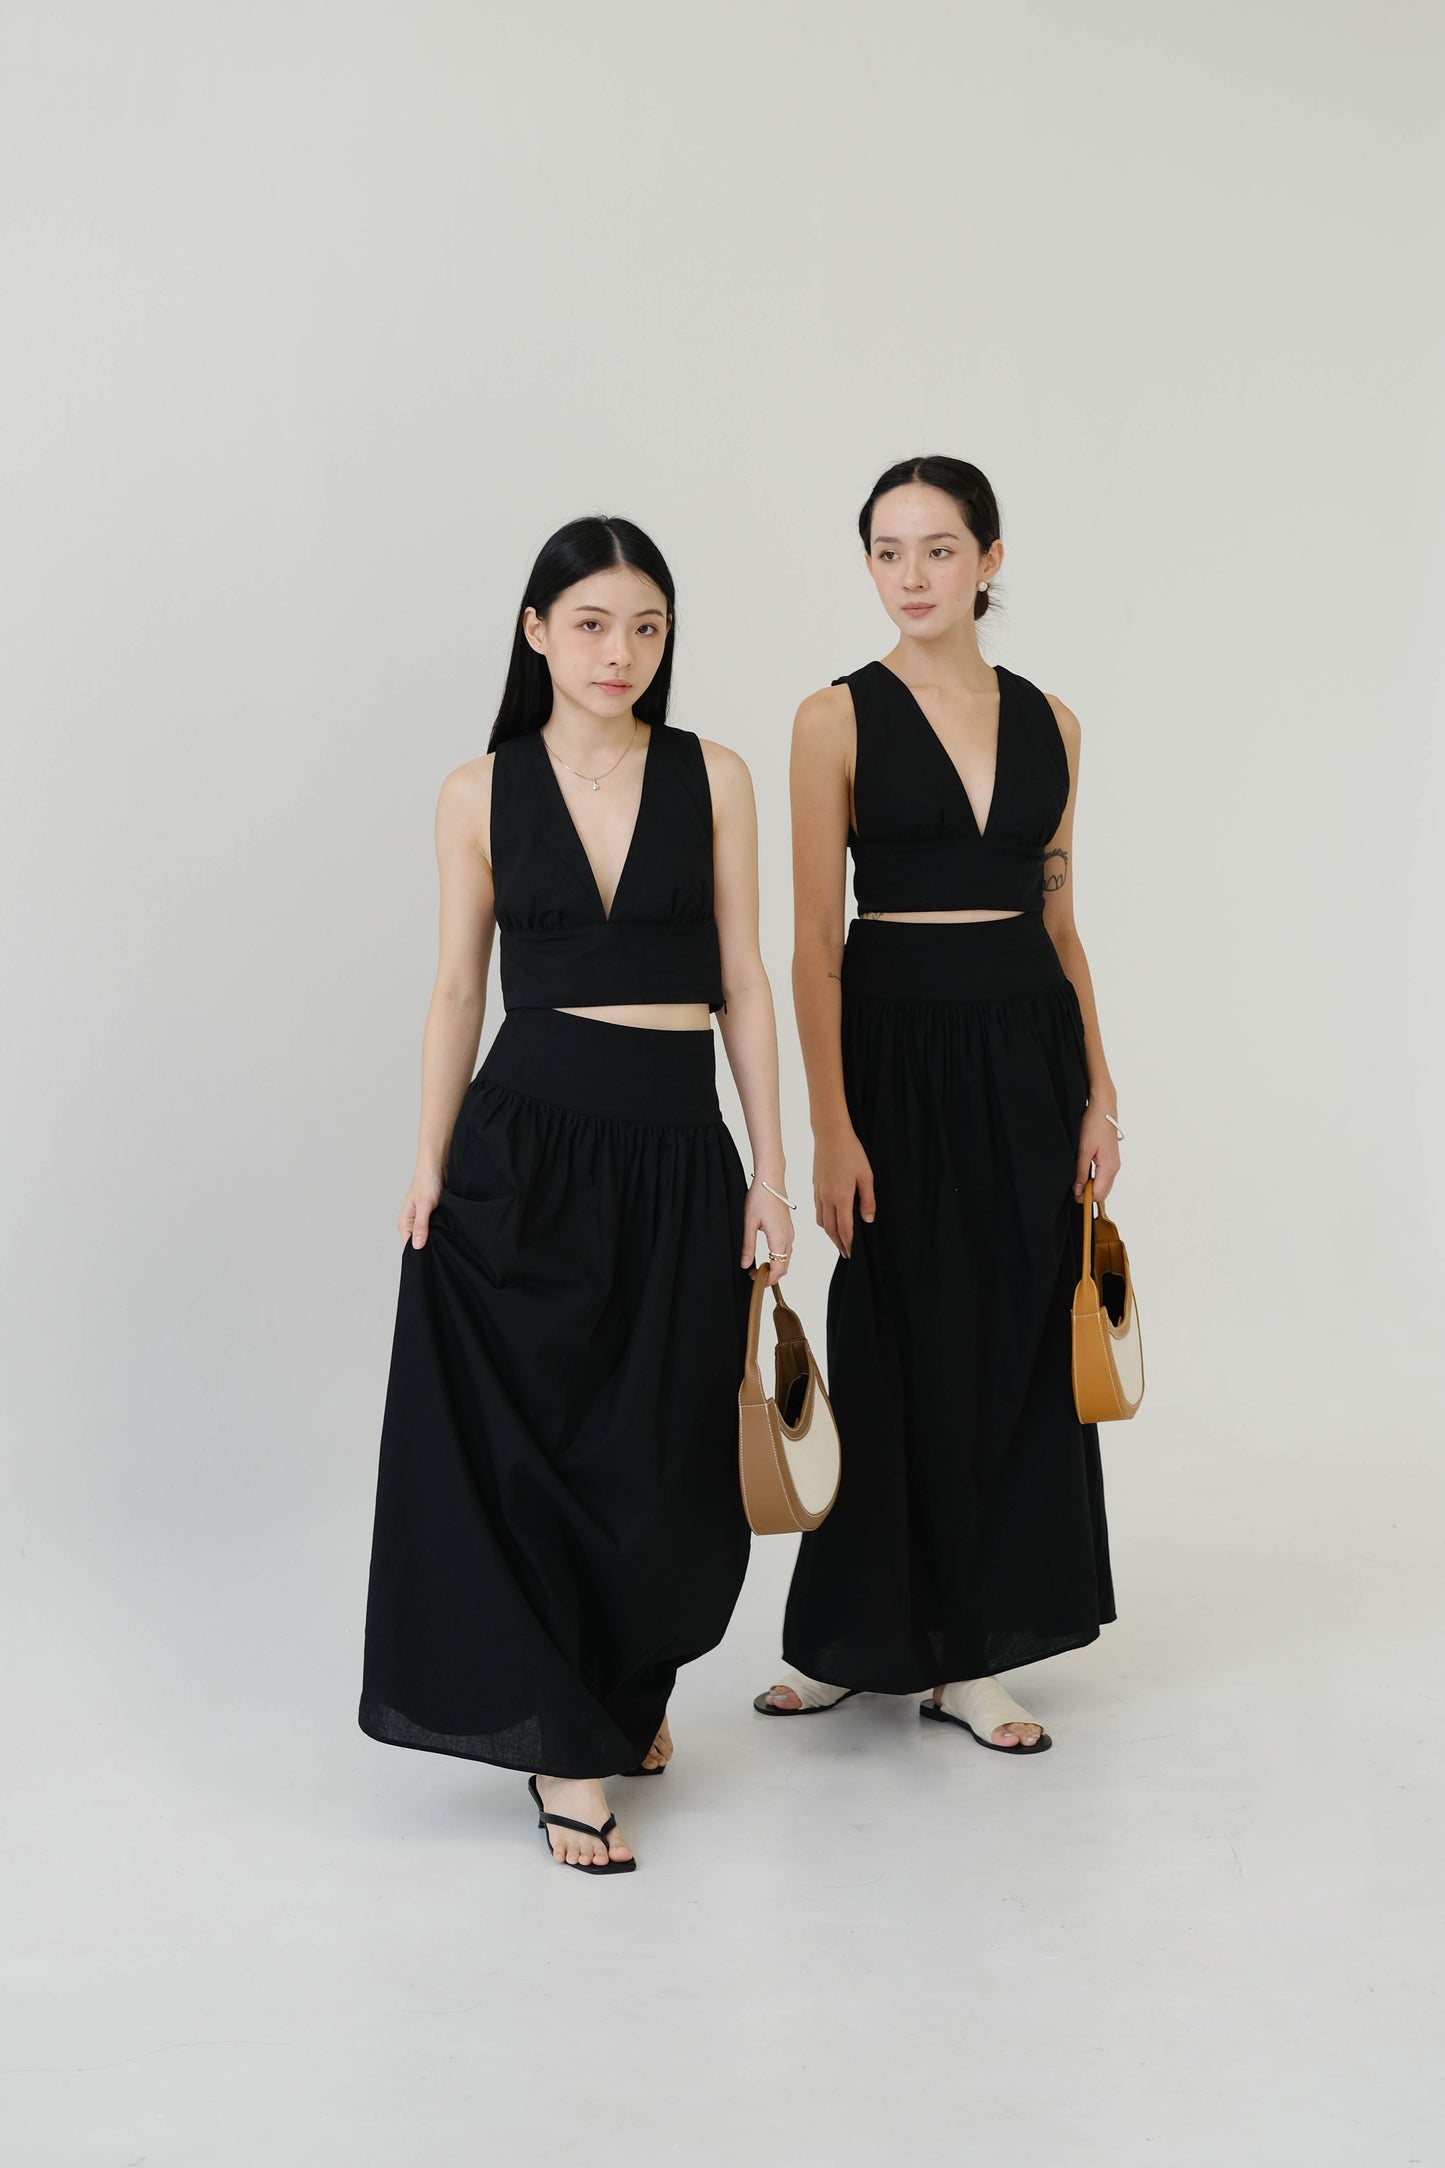 V-neck Sleeveless tank top + Long Dress in Classic Black in suit